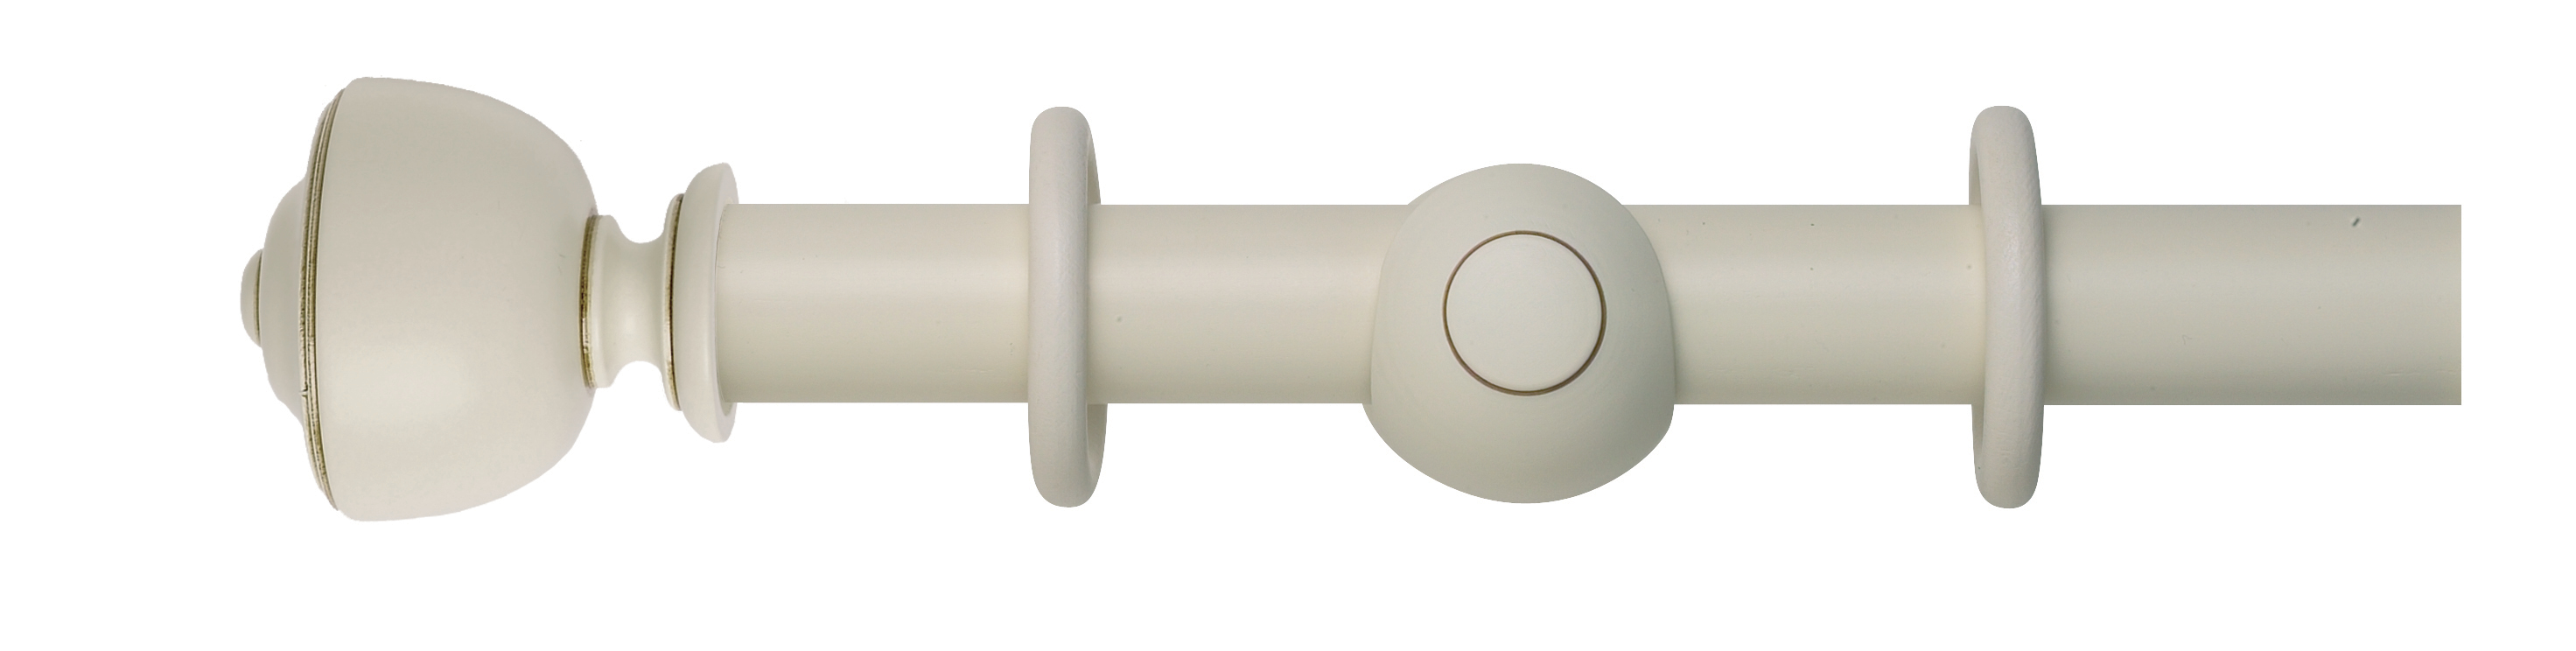 Museum 35mm Pole Set in Antique White with Asher Finial